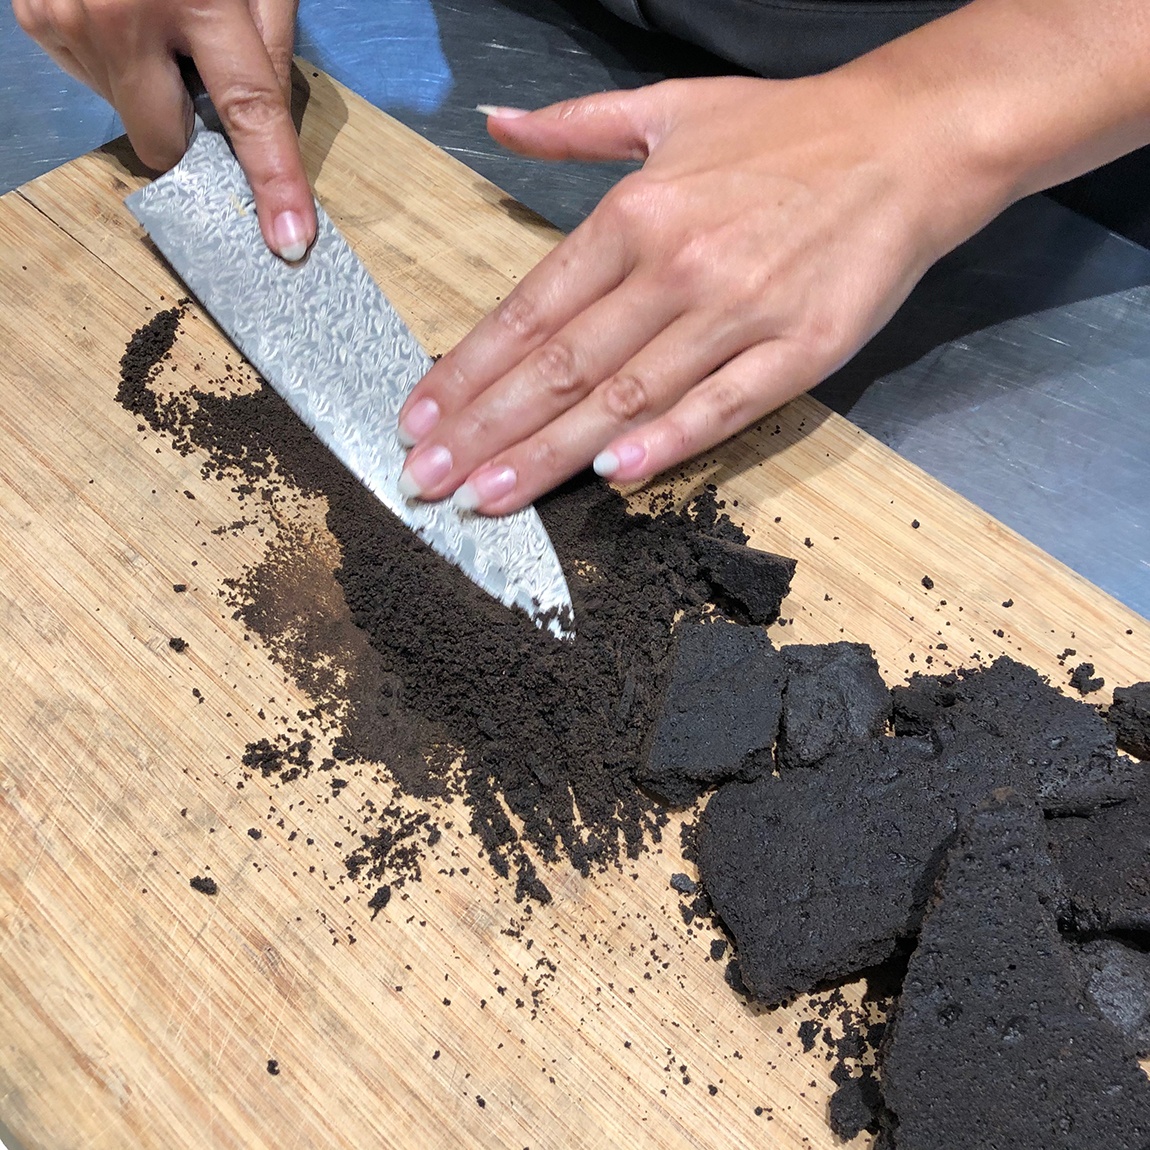 Summer Wright uses the flat side of a knife to crush chocolate wafers on a wood cutting board.